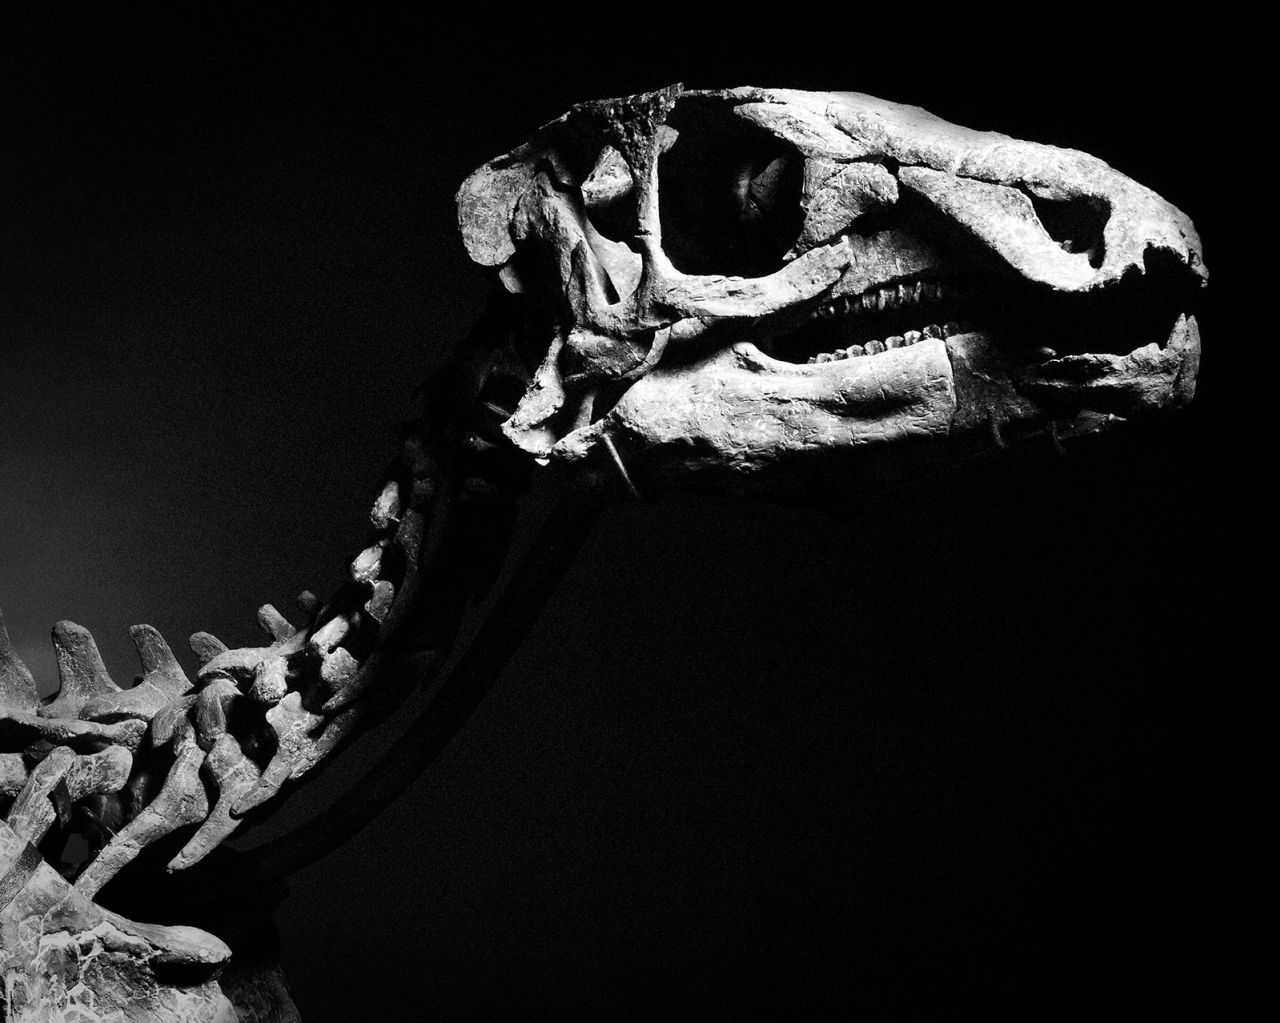 The iguanodon fossil is one of the latest dinosaur skeletons to go up for auction.